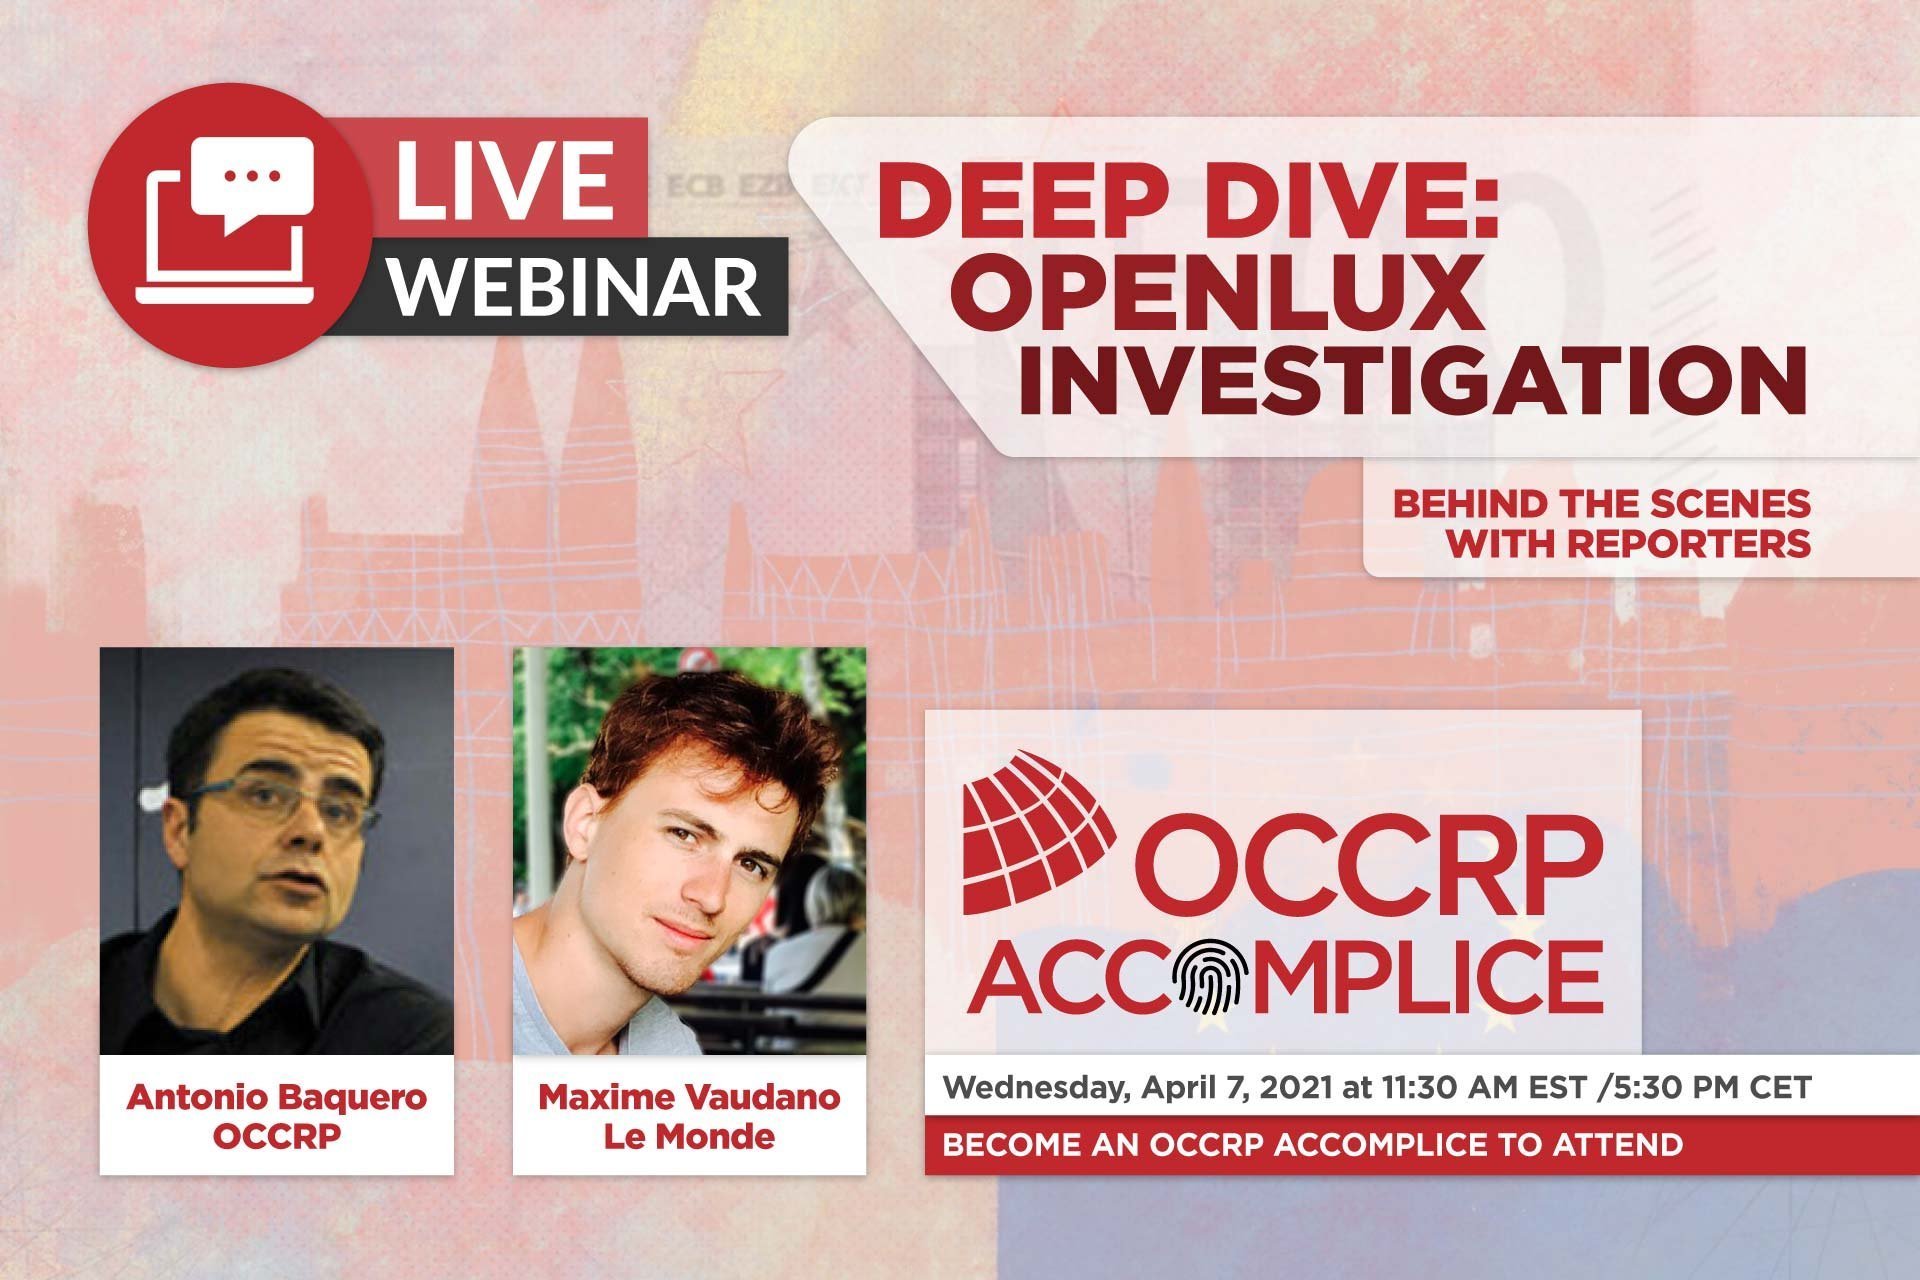 Go Behind the Scenes of our OpenLux Investigation With Journalists Antonio Baquero and Maxime Vaudano